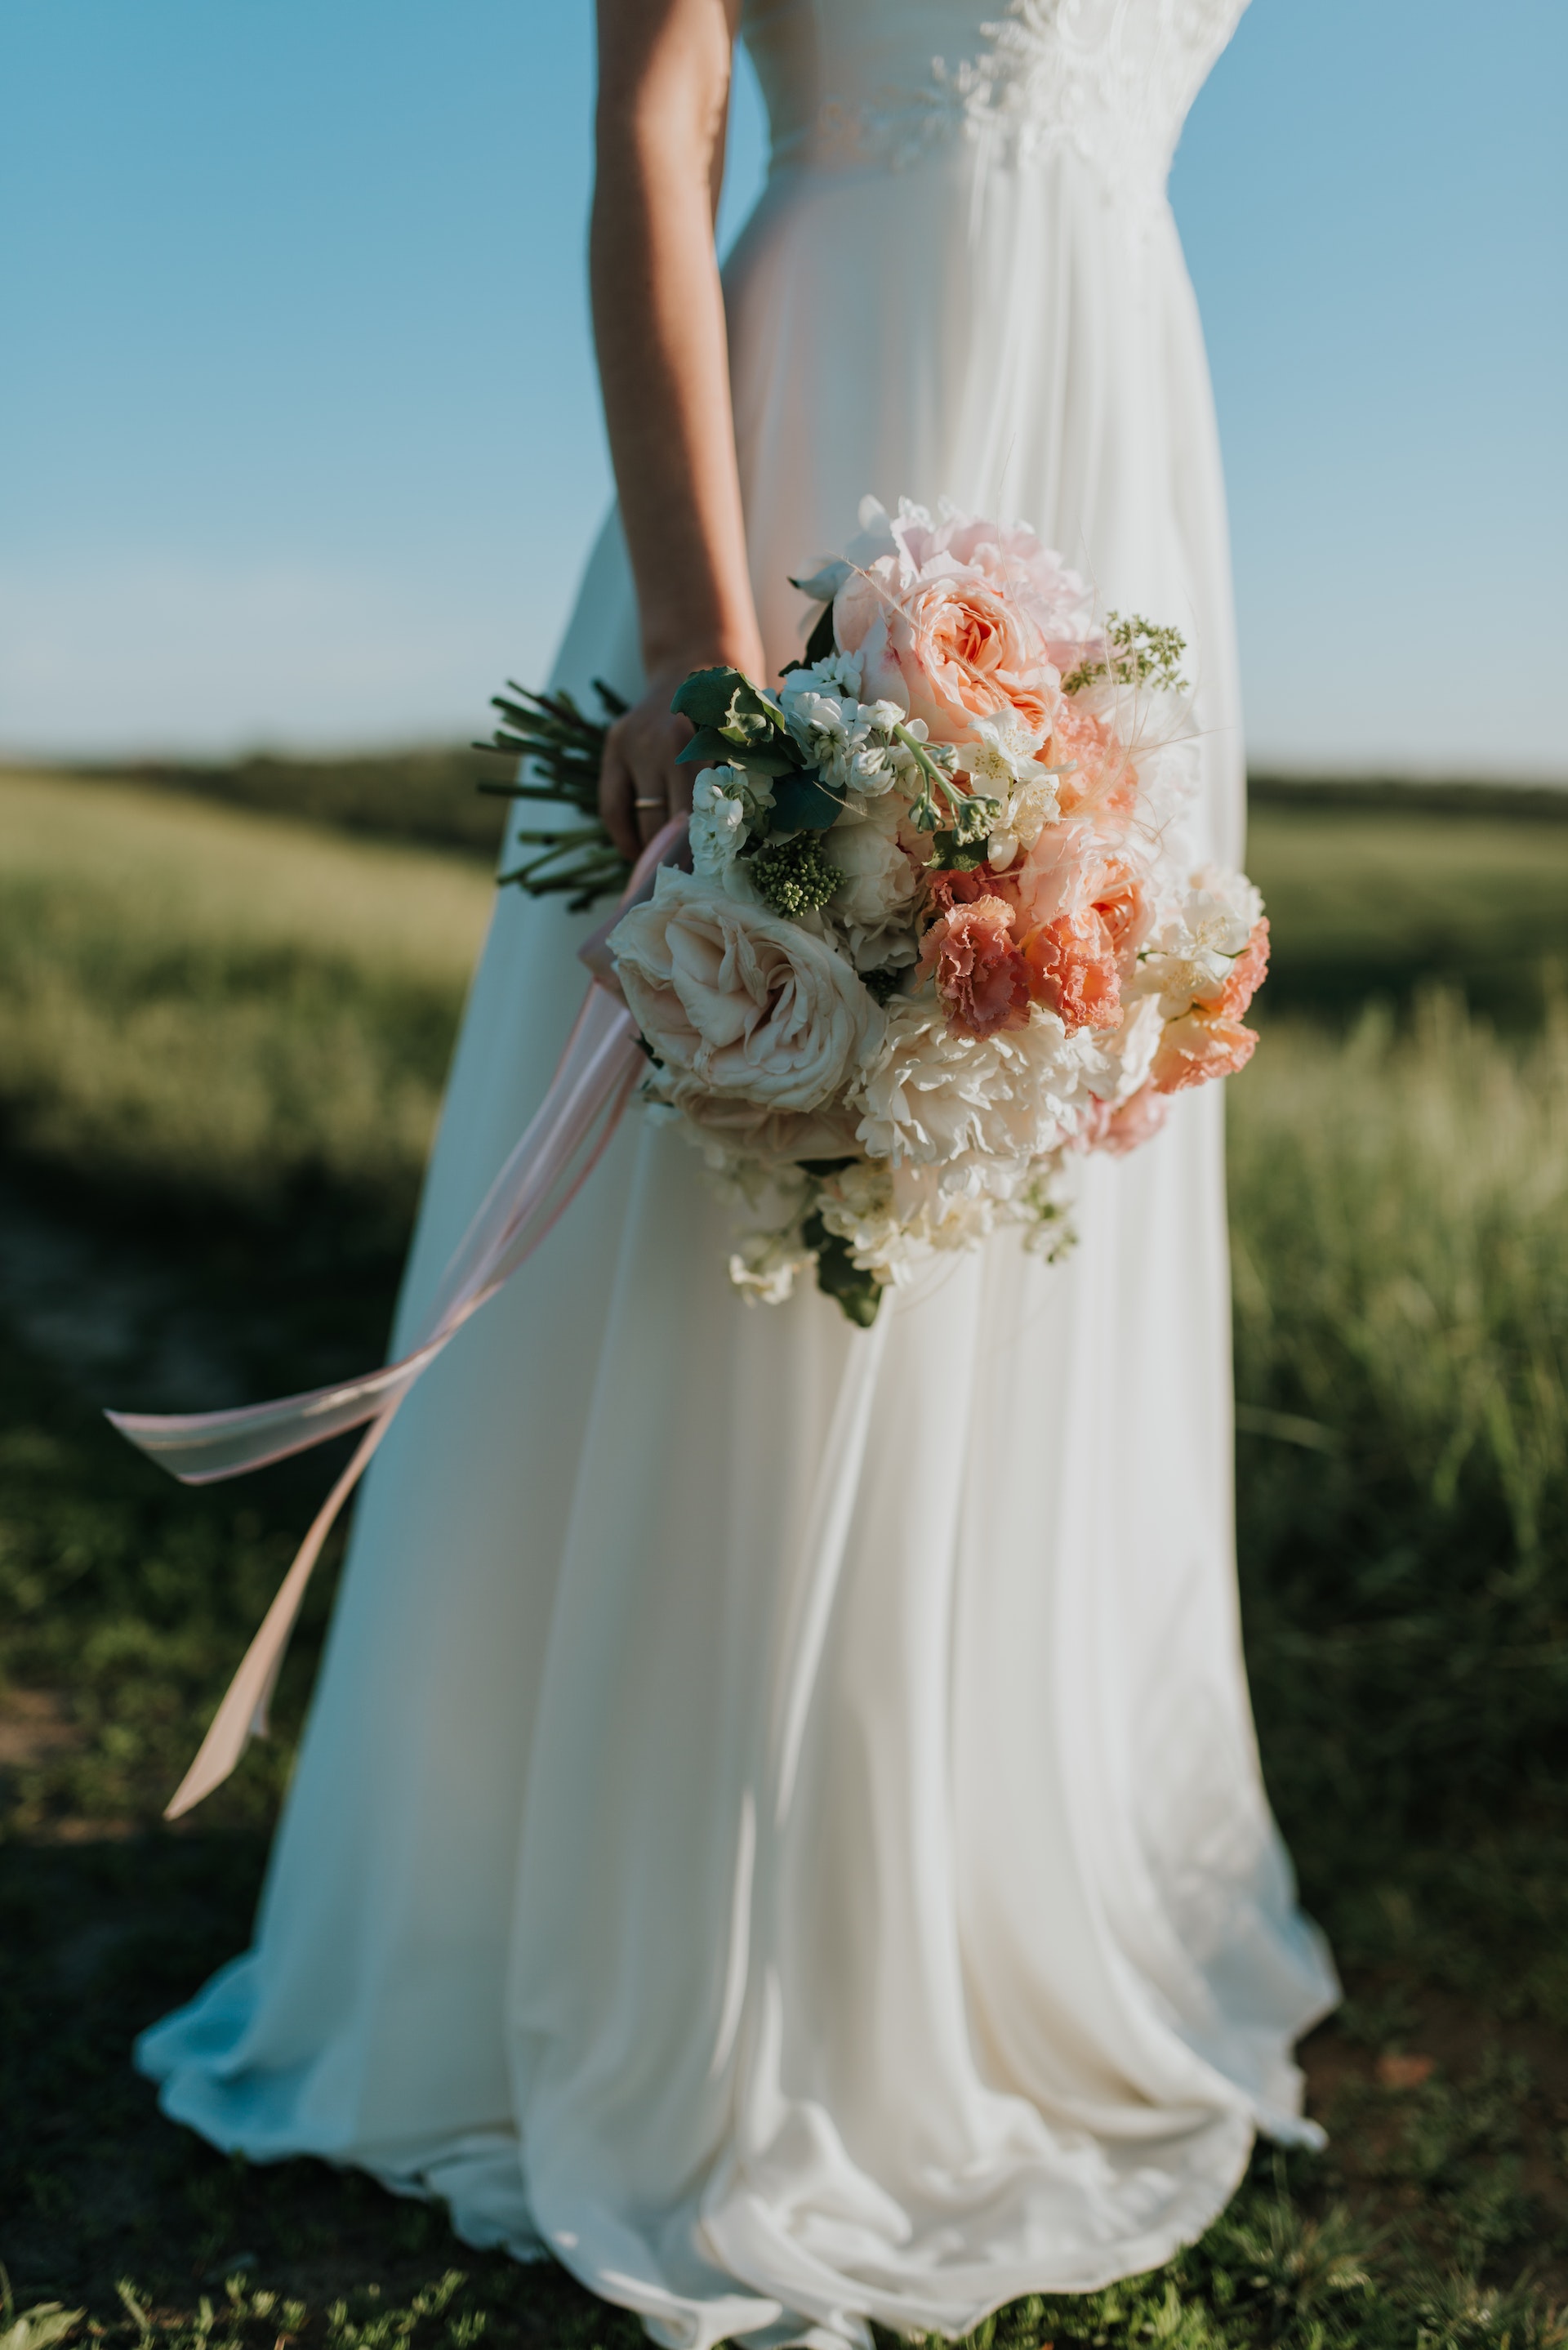 A woman wearing a white wedding dress is pictured holding a flower bouquet. | Source: Pexels